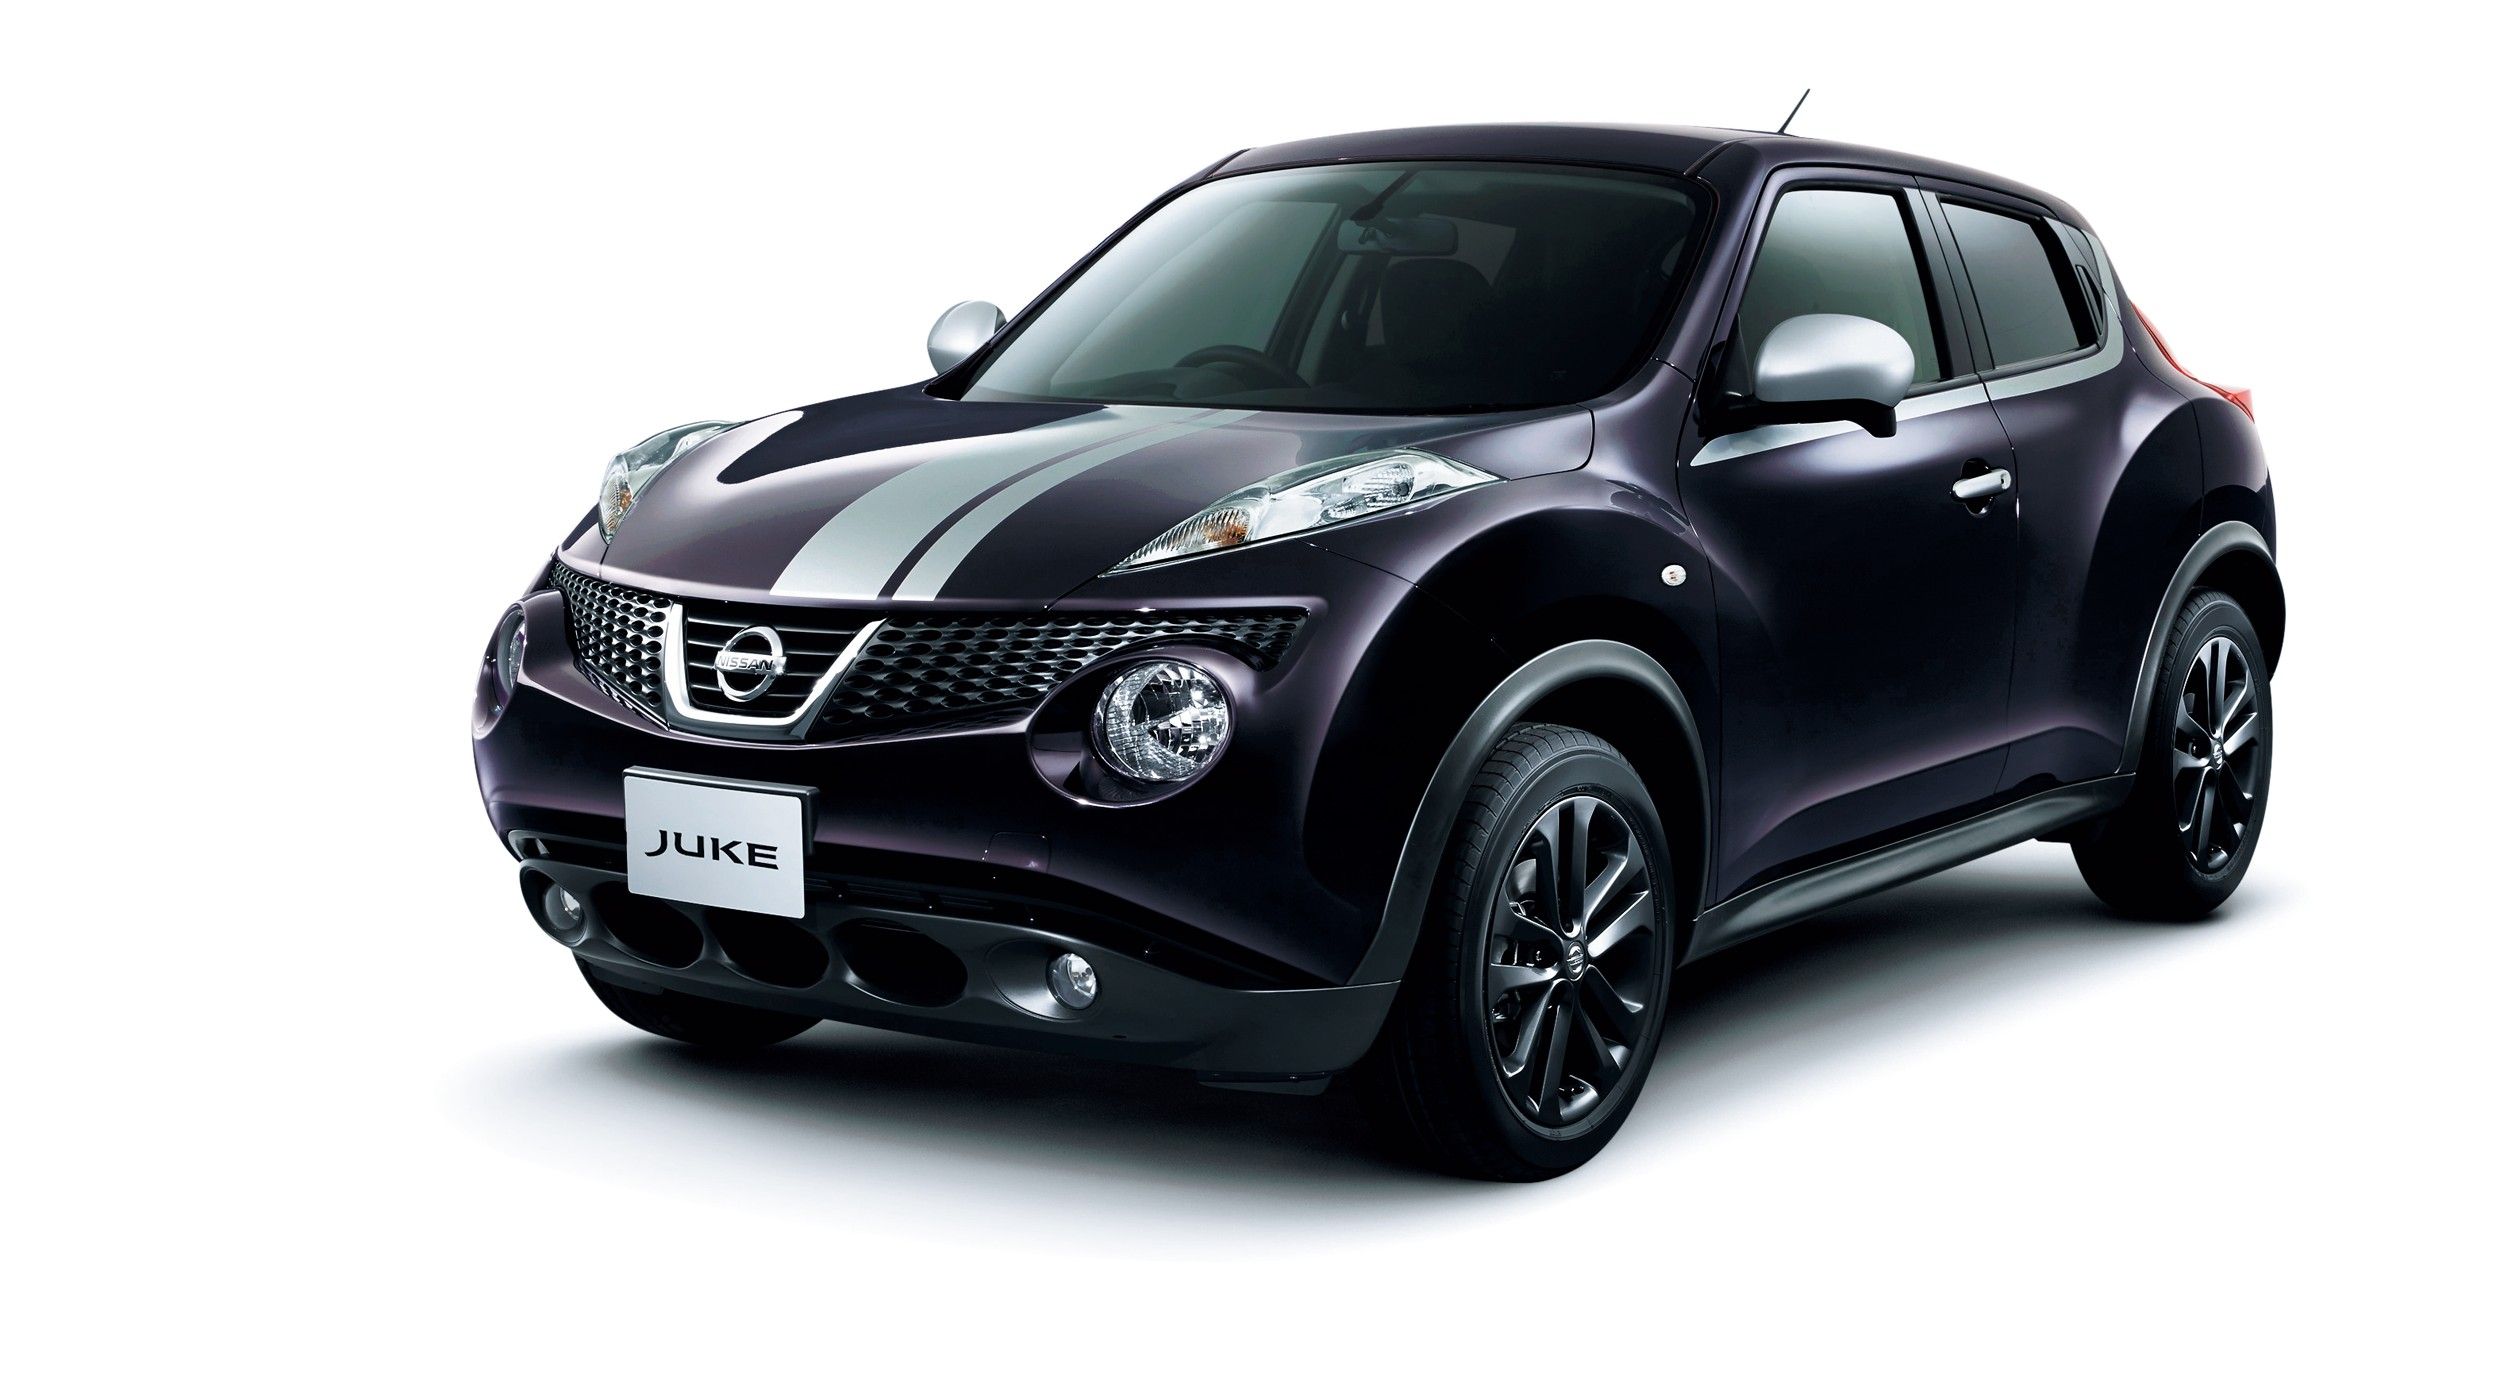 2013 Nissan Juke 15RX Personalized Package